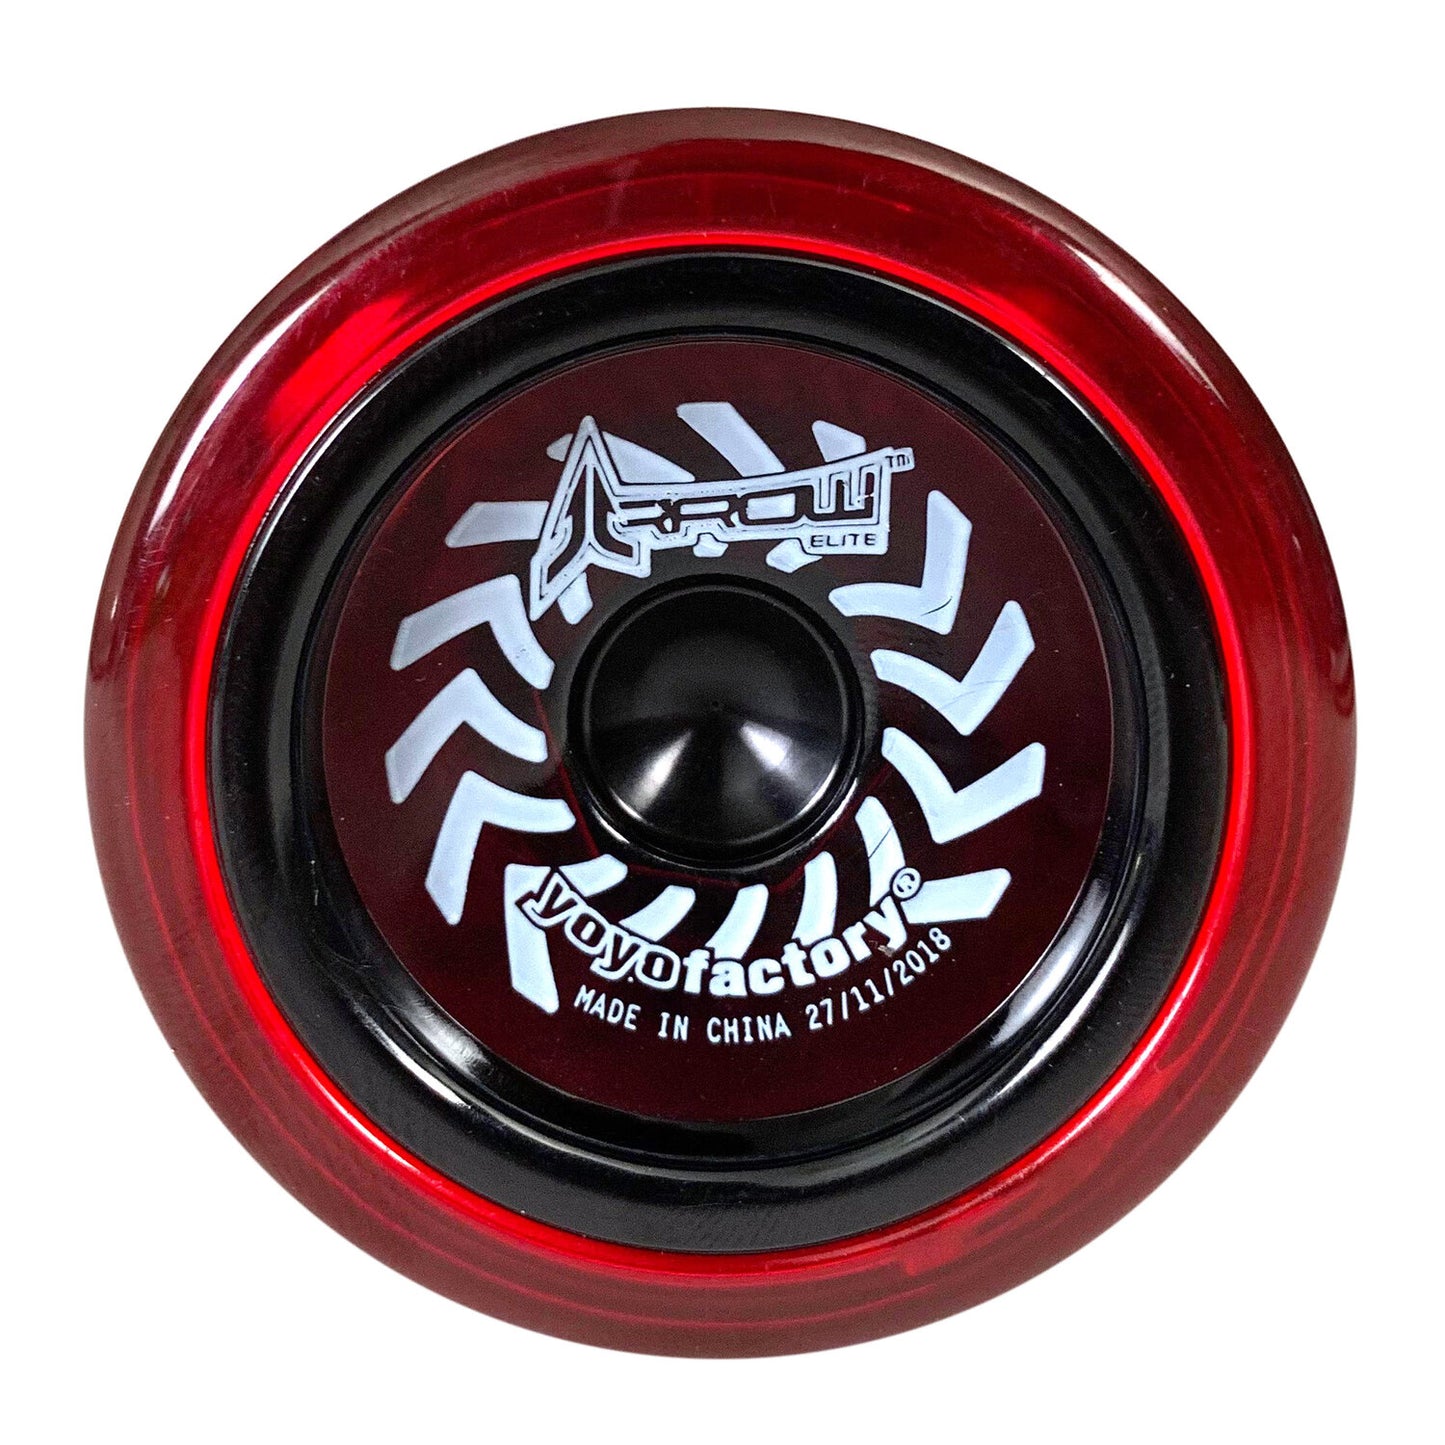 arrow yoyo red with black cap side view